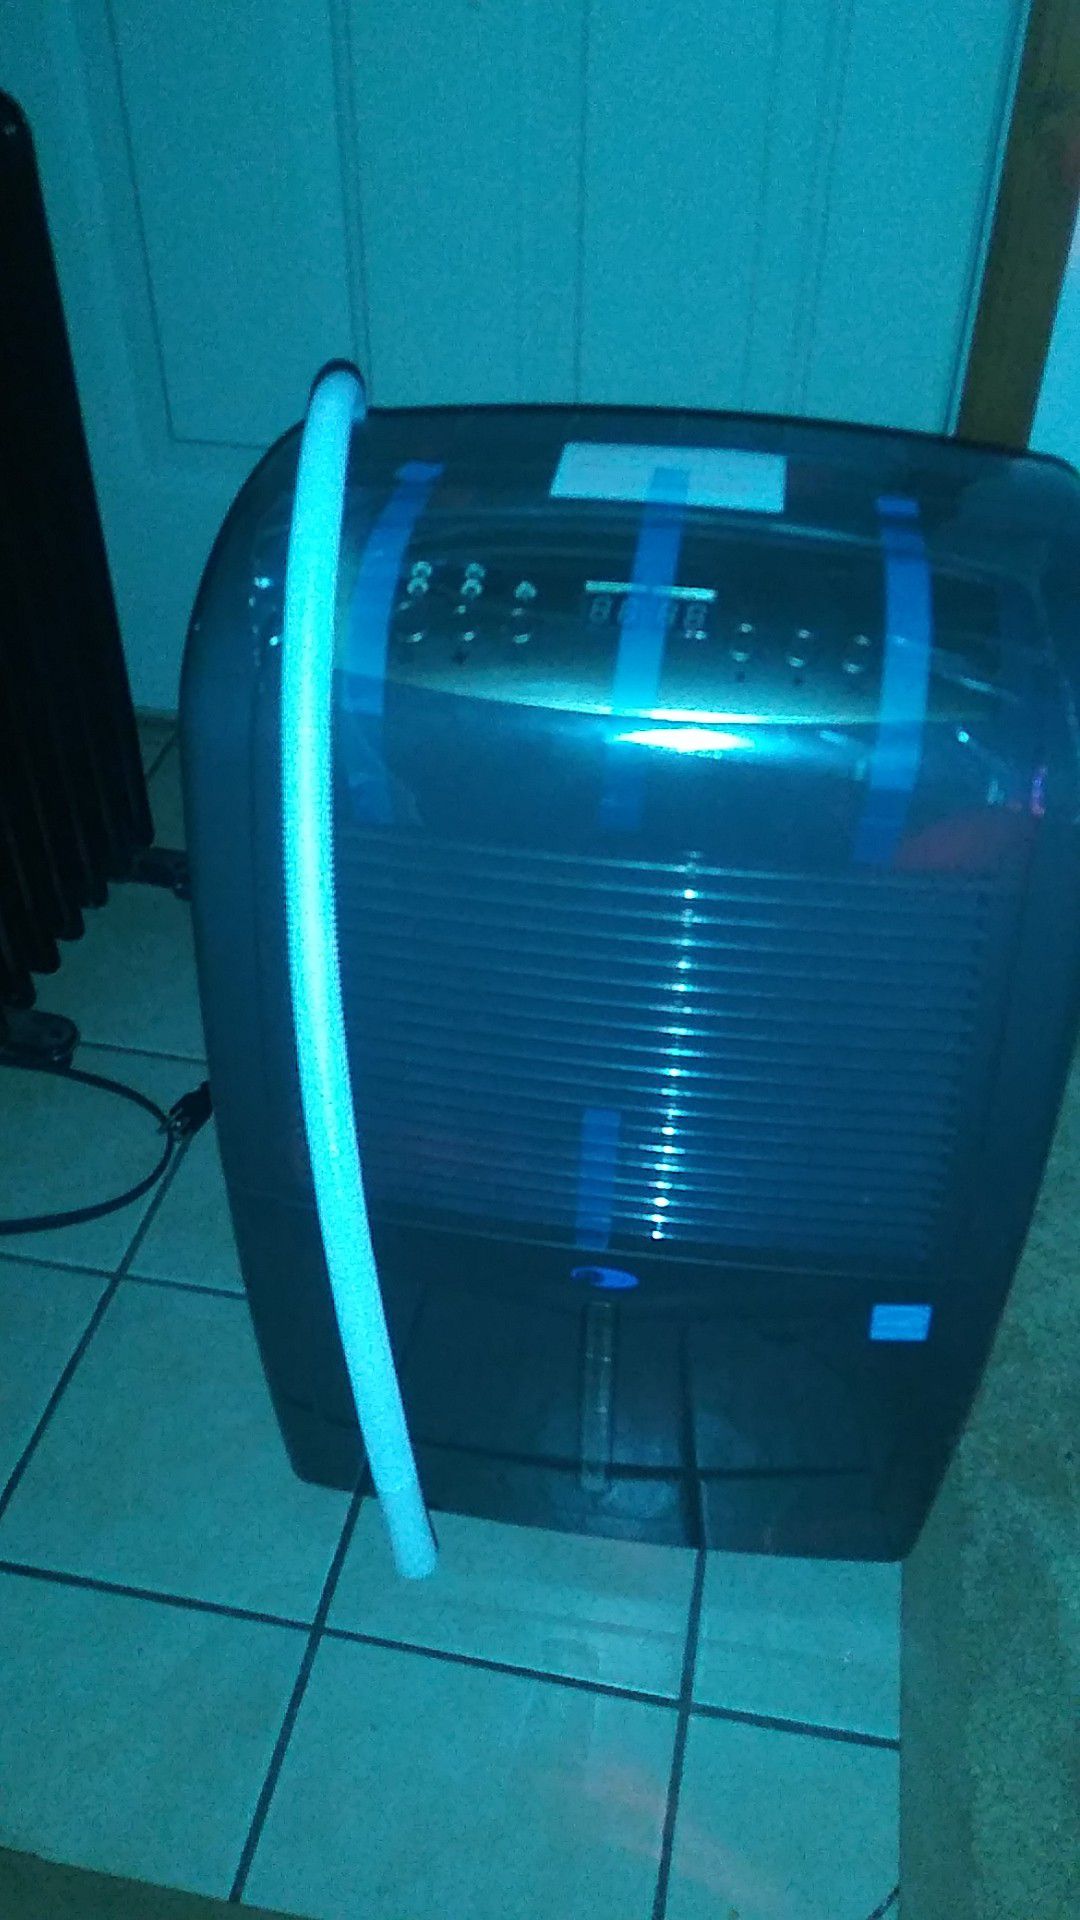 Dehumidifier. Make me an offer. Brand new. It was giving to me never used!